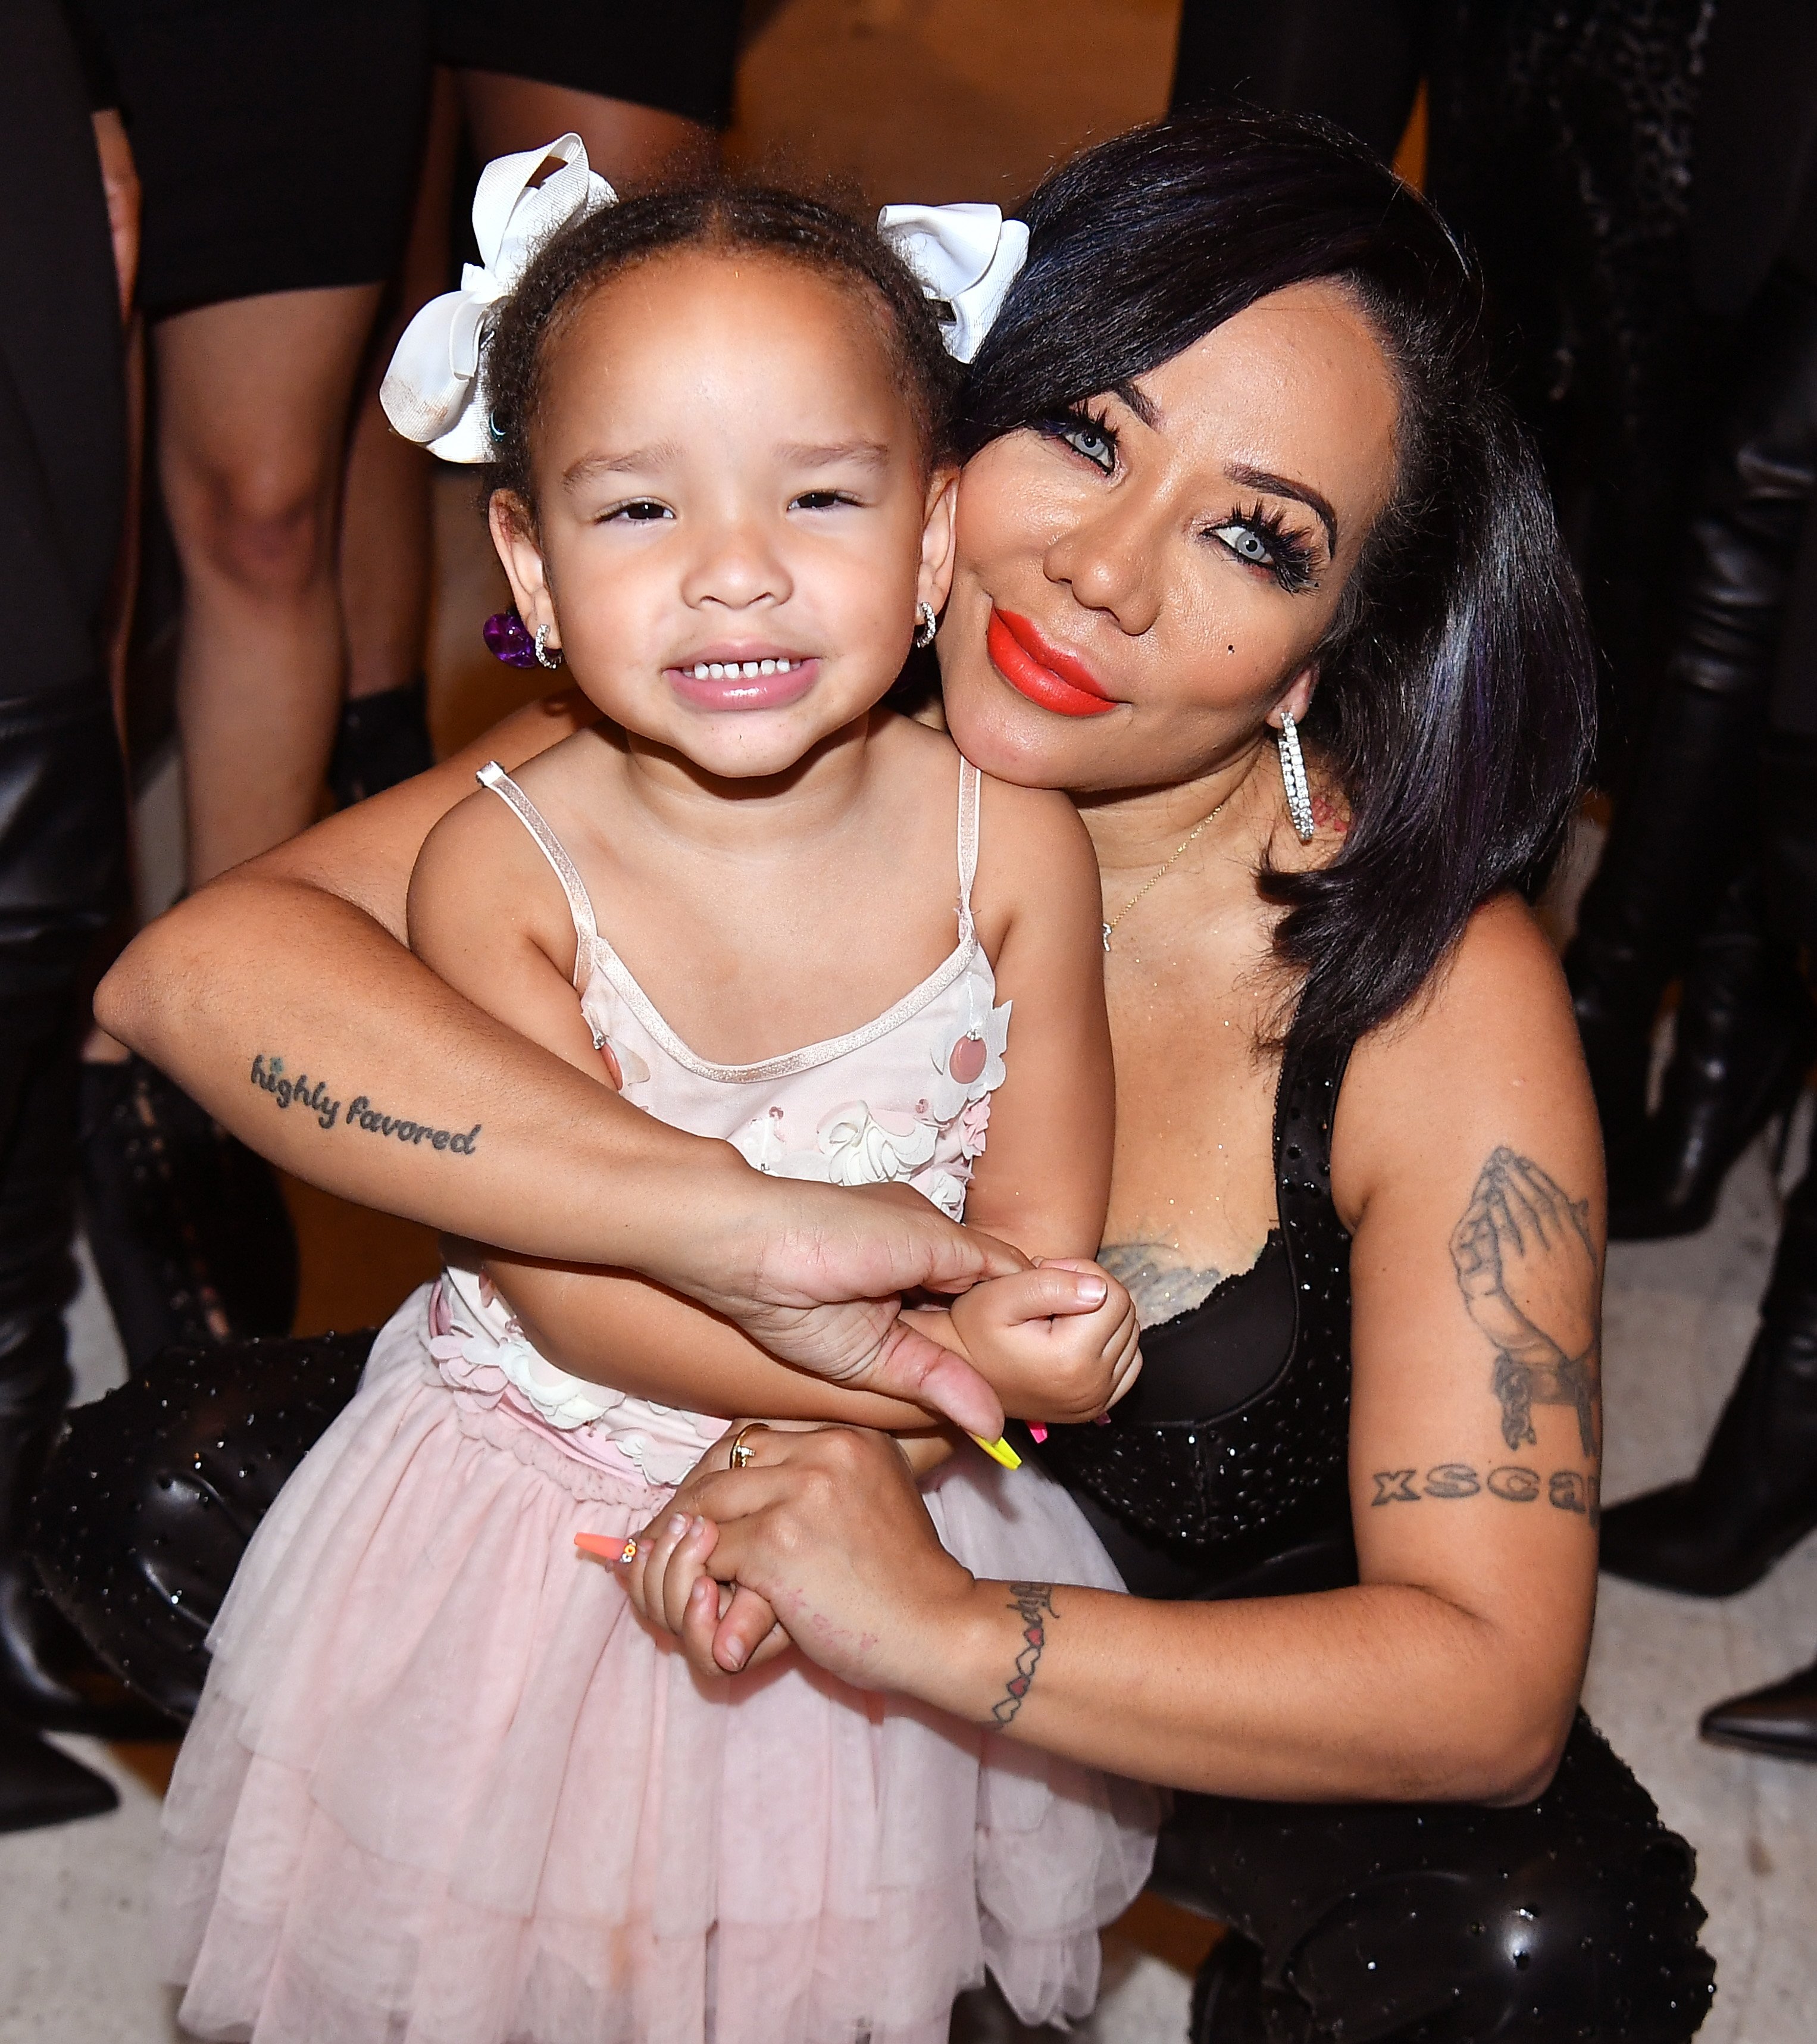 Tameka "Tiny" Harris and her daughter Heiress Harris at "Majic 107.5 After Dark" at City Winery on September 03, 2019 in Atlanta, Georgia.|Source: Getty Images